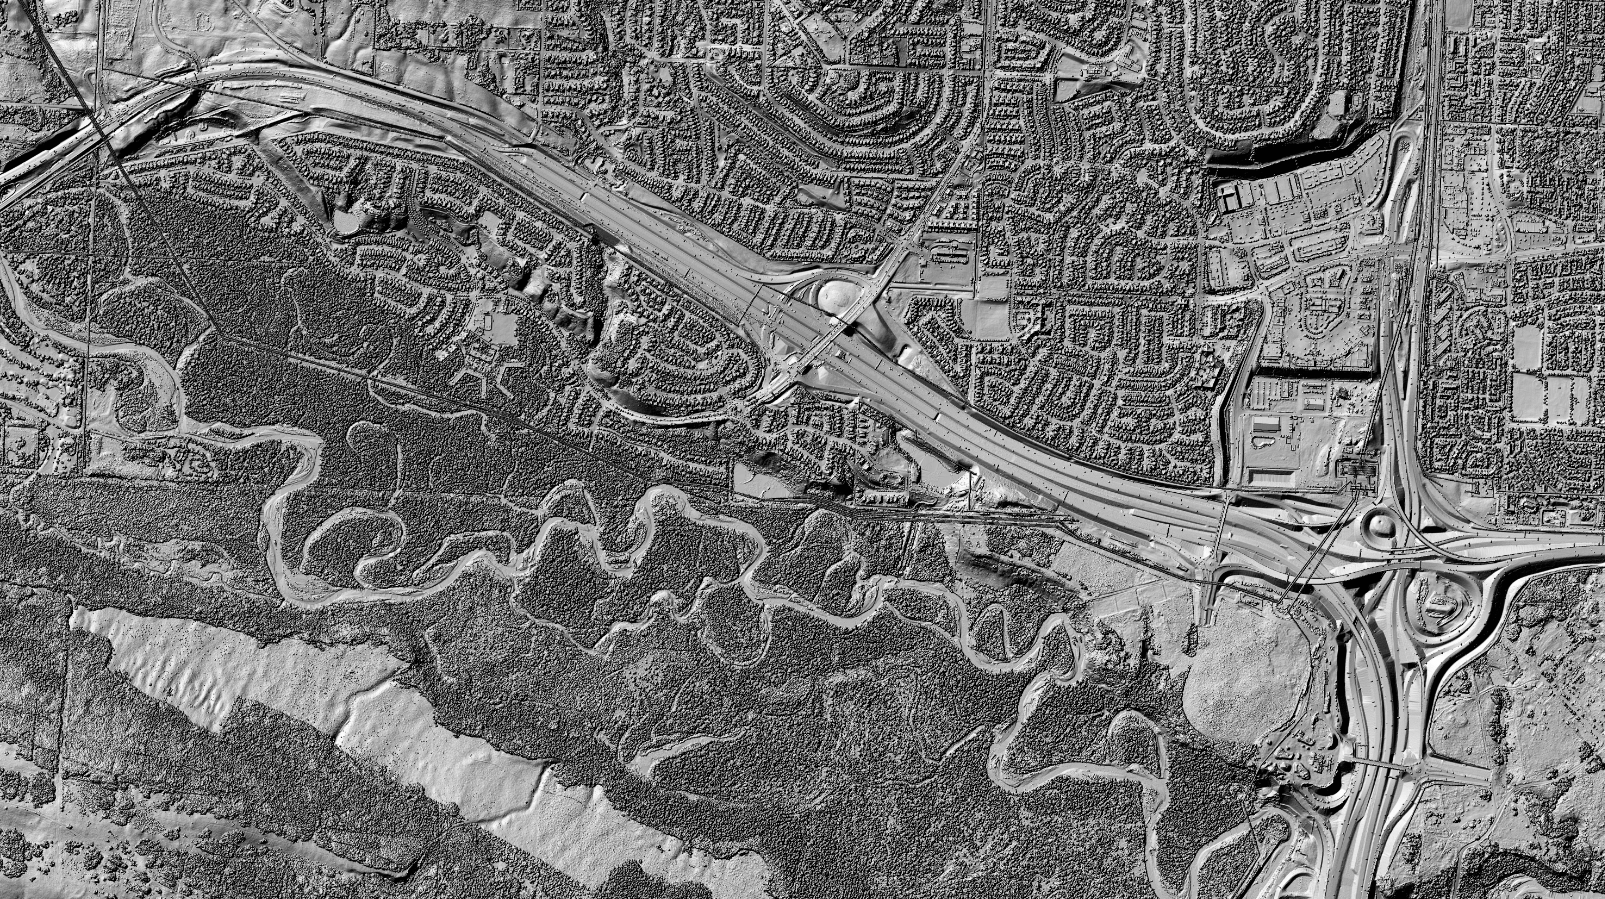 Shaded 3D reliefs of the Digital Surface Model (top image) and the Digital Terrain Model (bottom image) covering an area of the City of Calgary, AB.